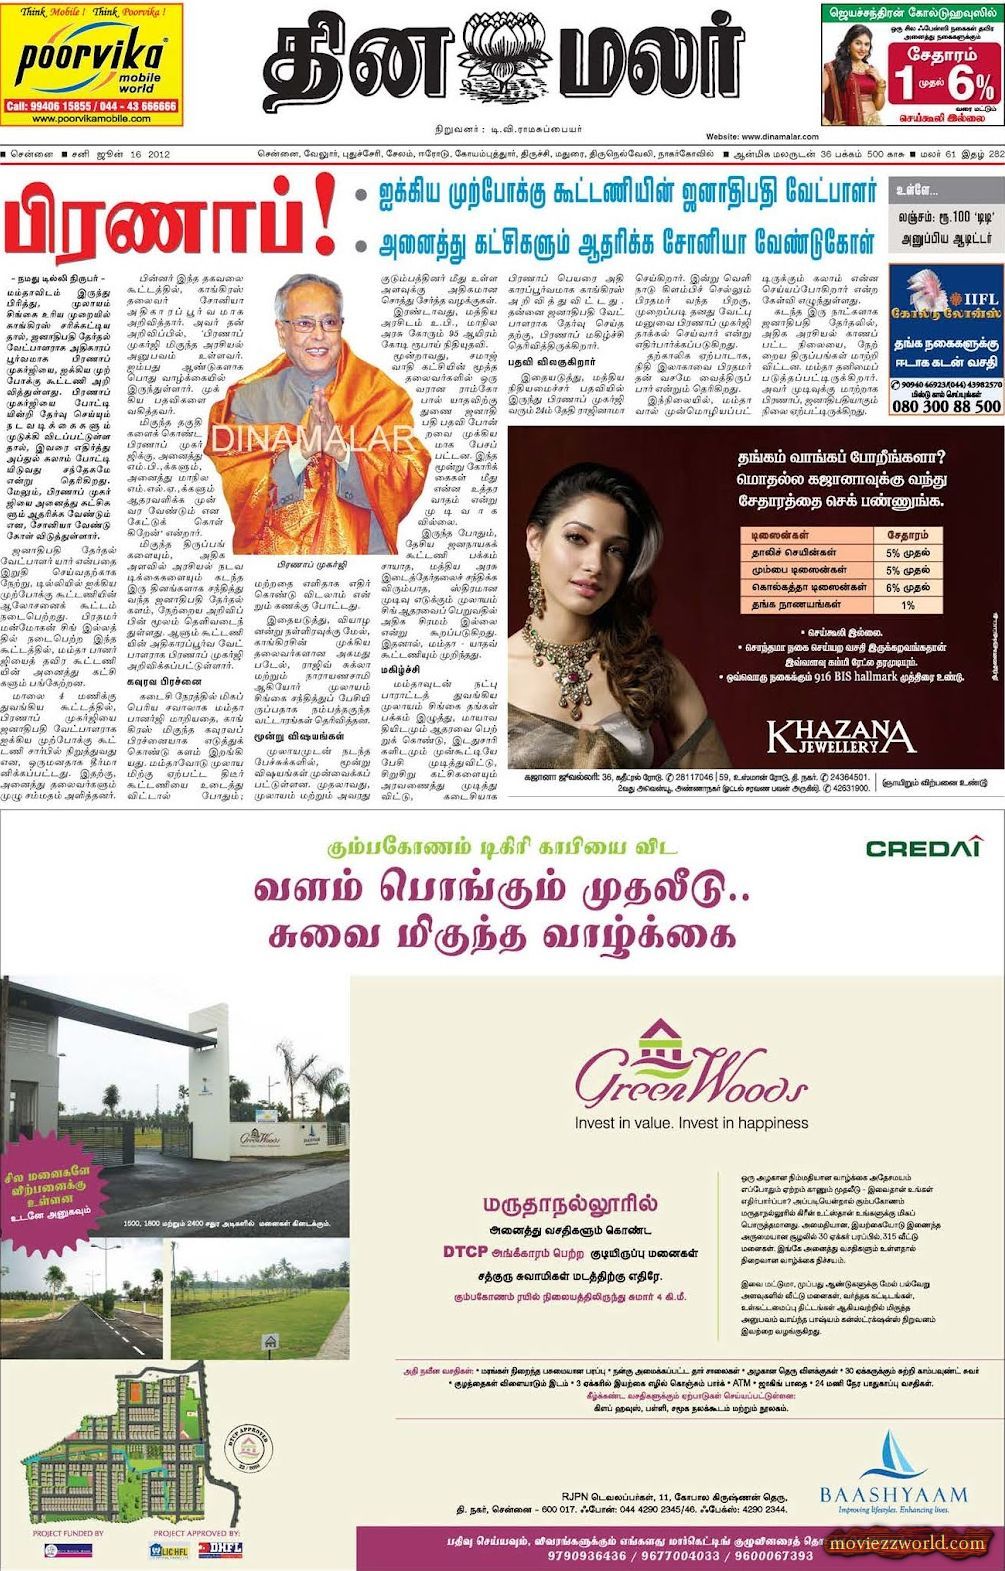 Chennai News Today In Tamil